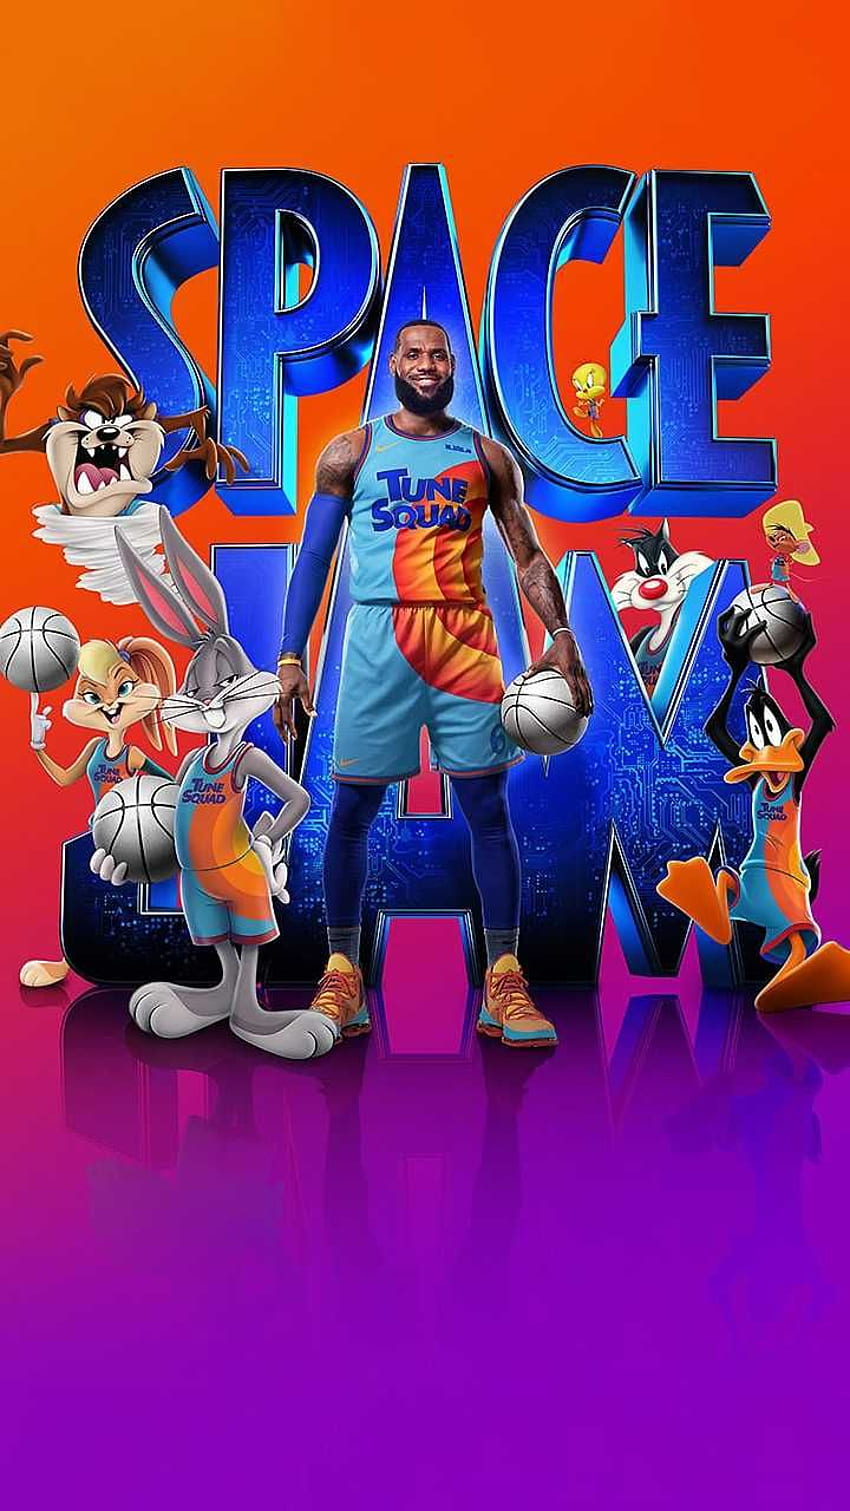 iPhone Space Jam Discover more basketball, Film, Lebron, Lebron James, Movies .. Looney tunes , Space jam, Space jam costume, Space Jam iPhone HD phone wallpaper